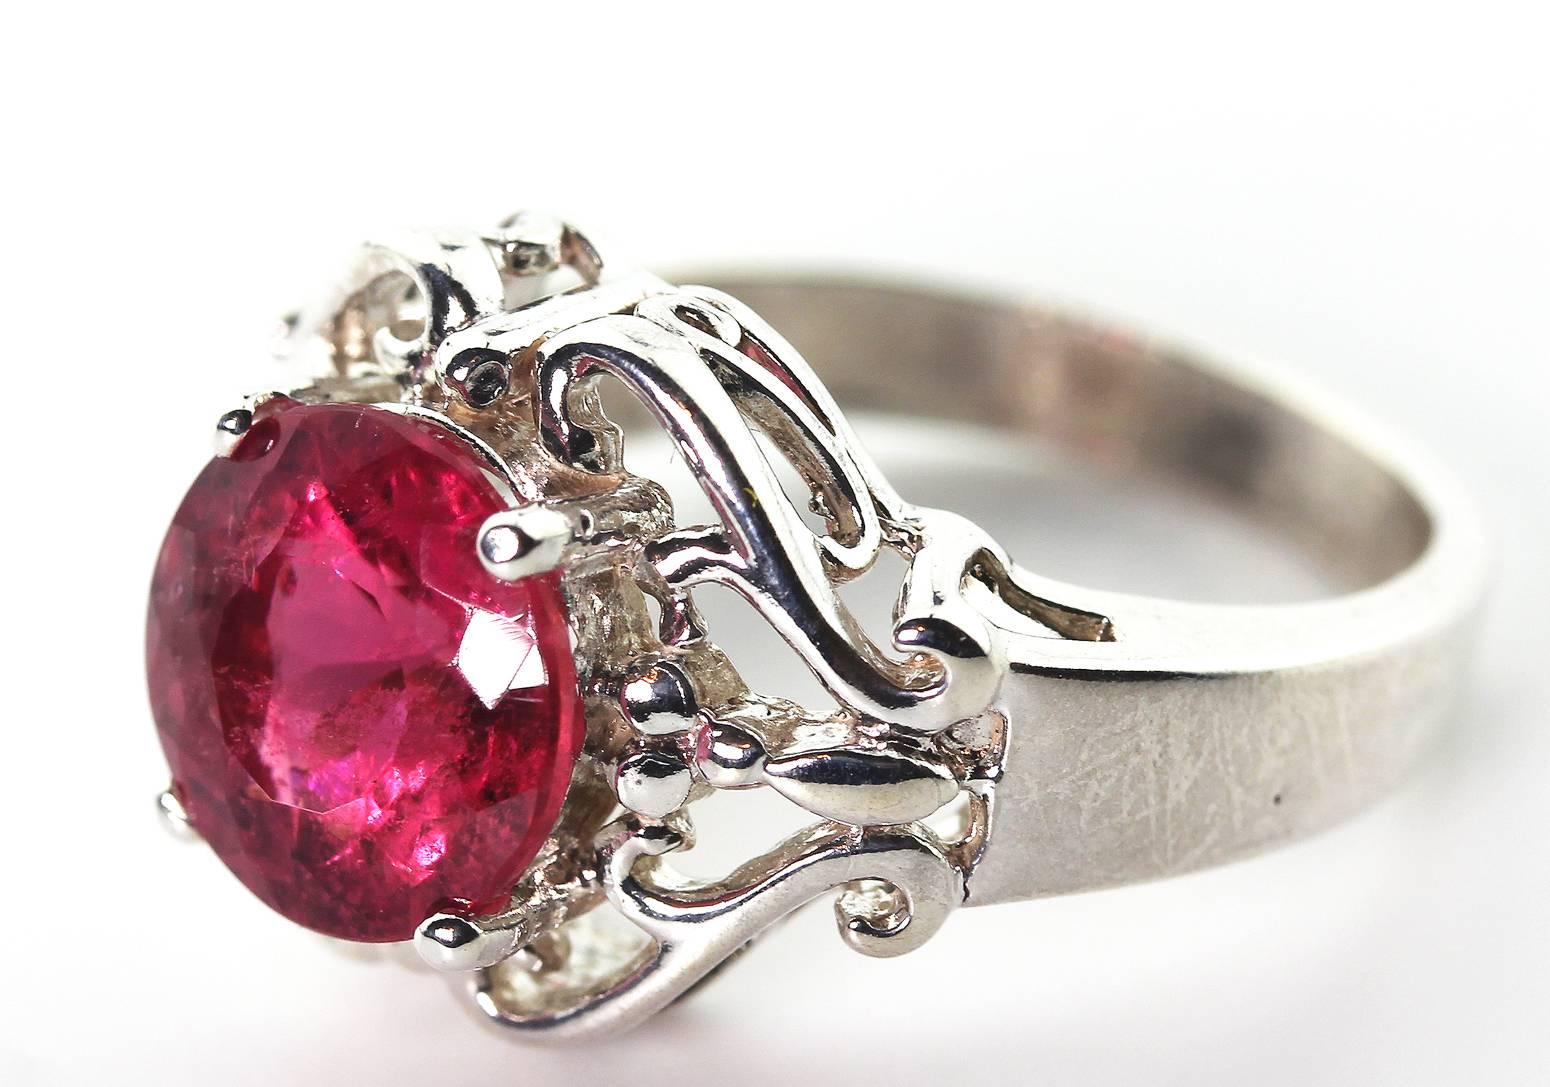 Round Cut AJD Gorgeously Glittering 2.74 Ct ReddishPink Tourmaline Silver Cocktail Ring